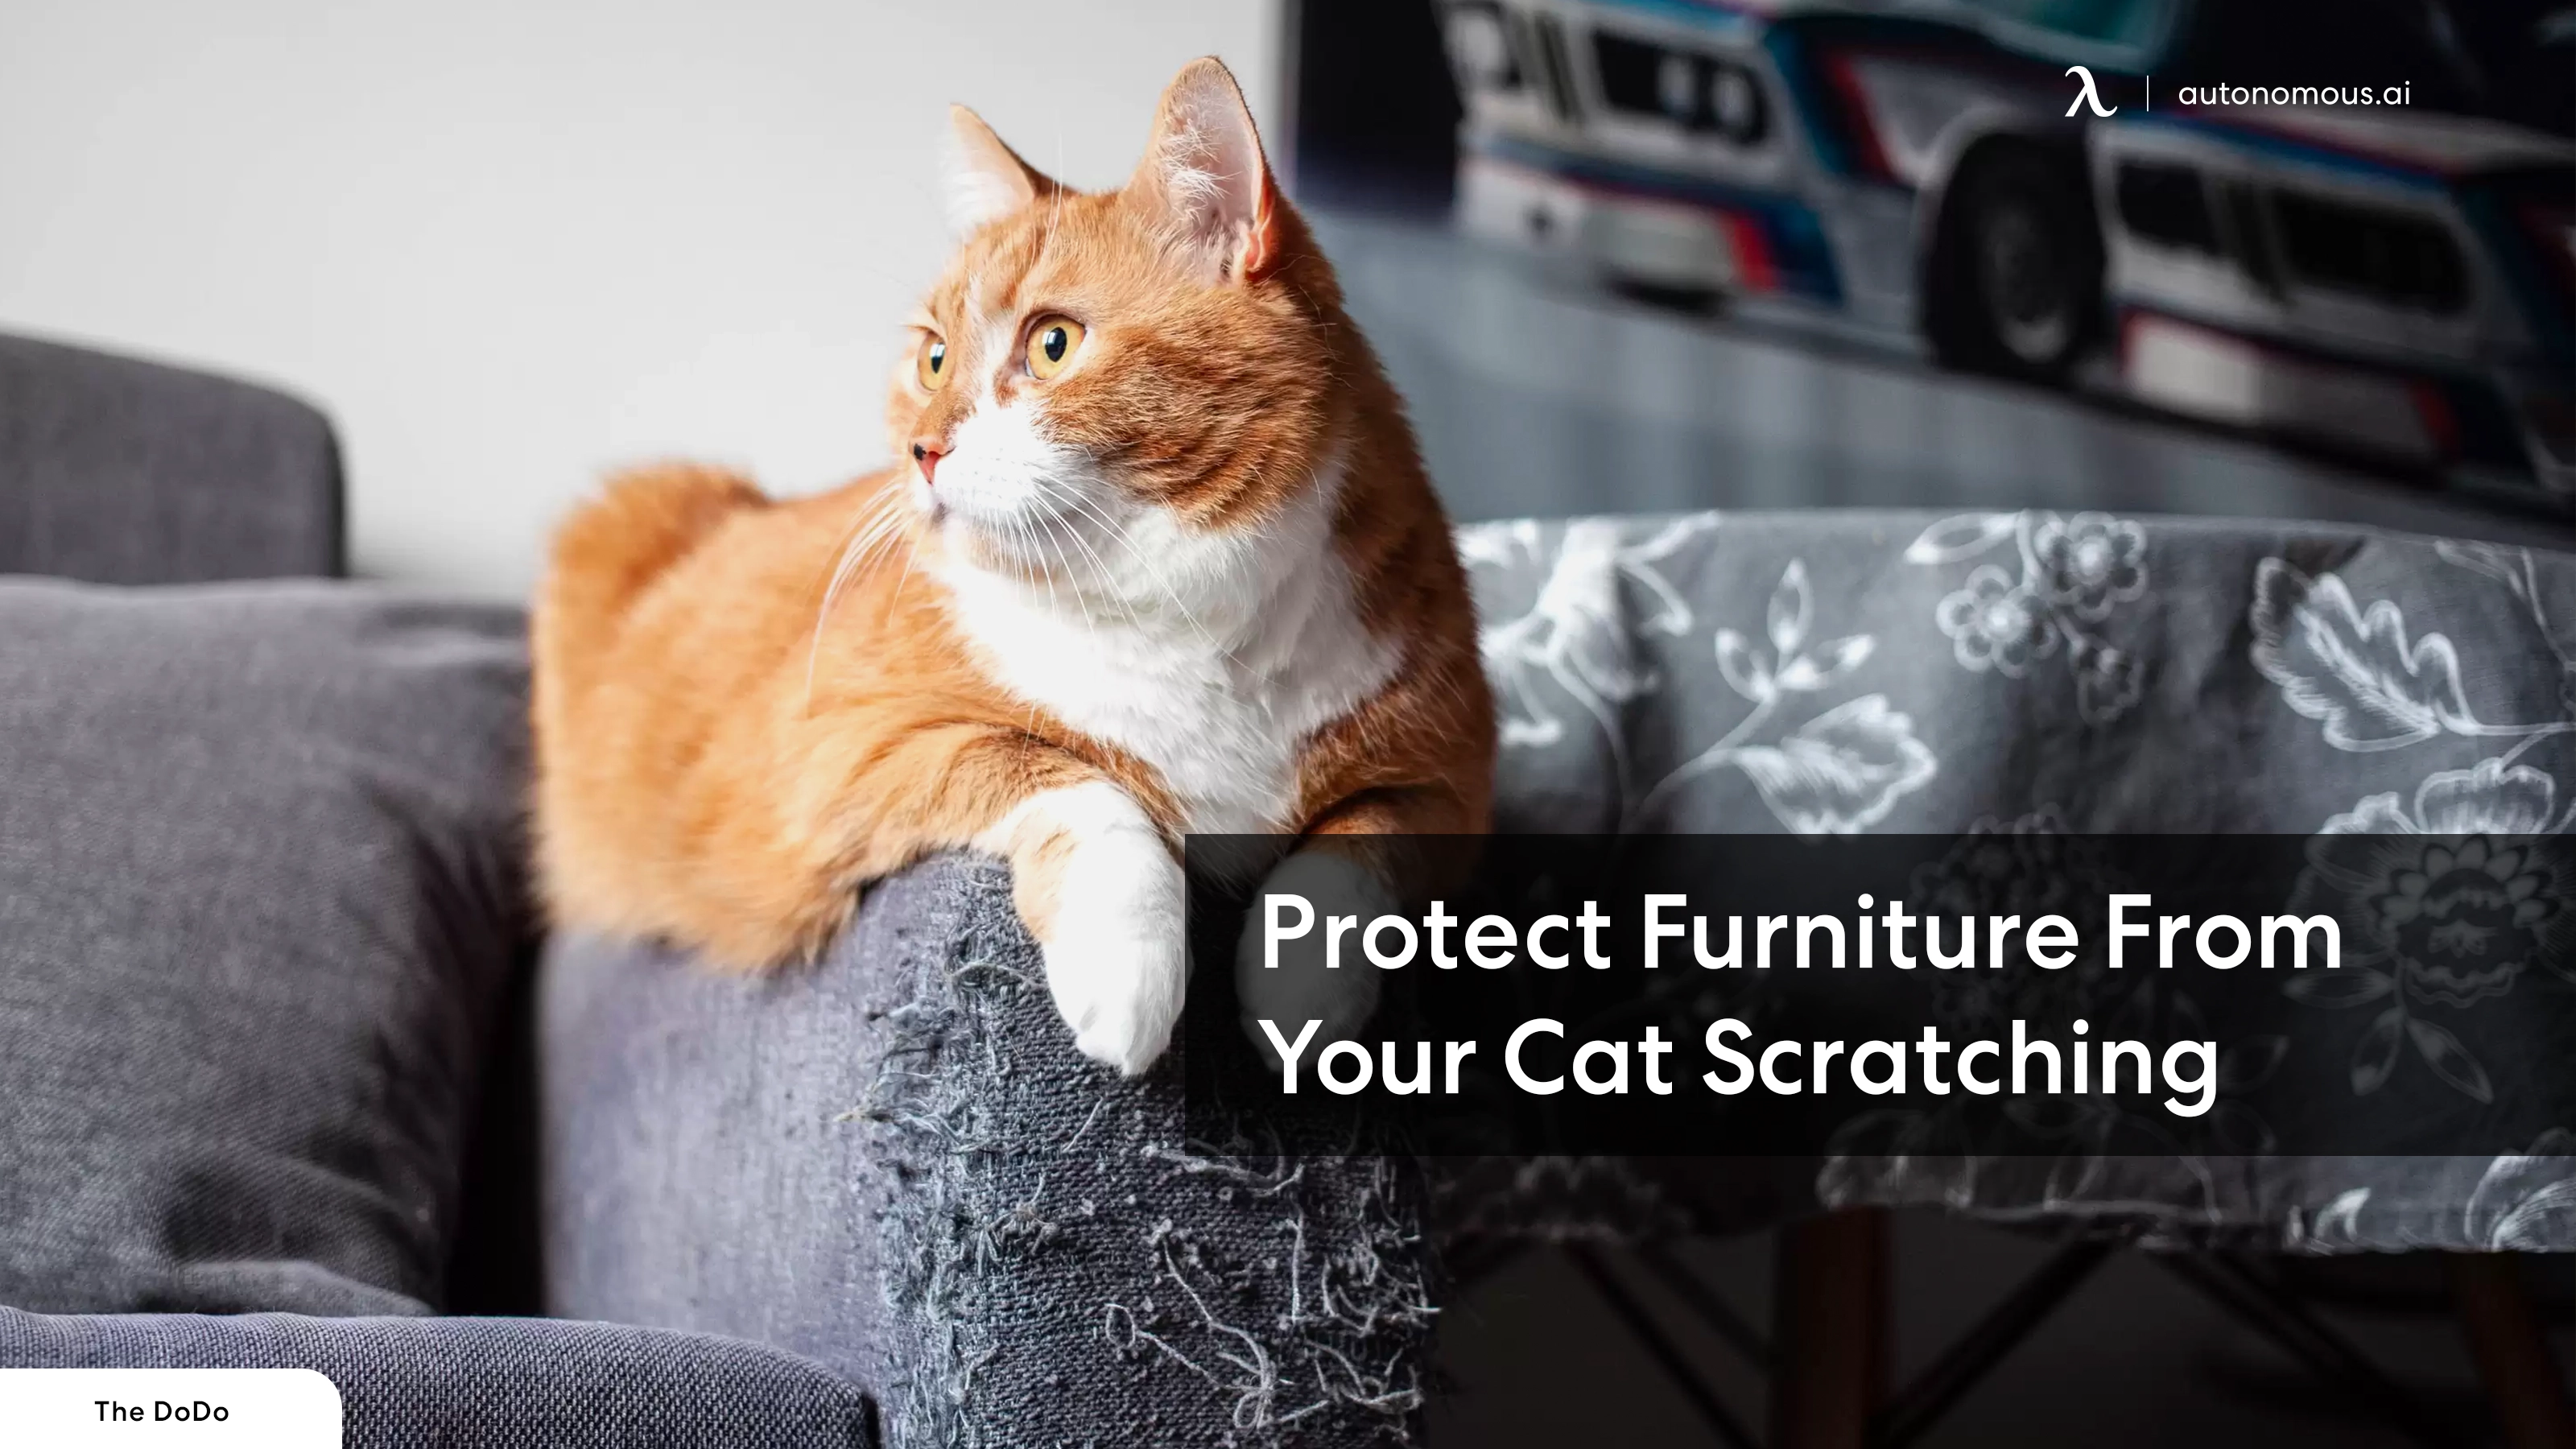 How to Protect Furniture From Your Cat Scratching | 10 Tips for Pet Parents